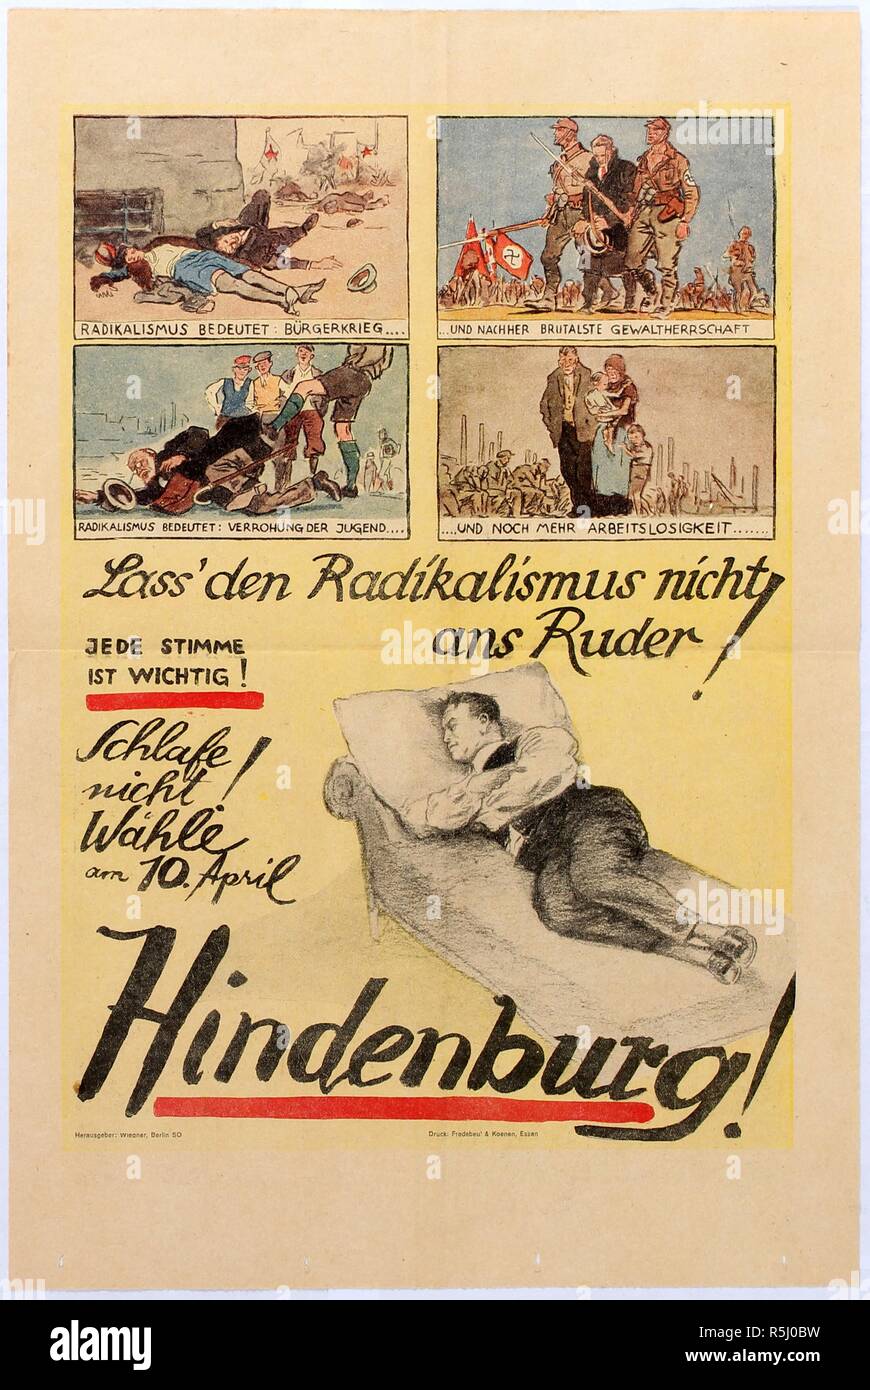 Do not sleep! Vote for Hindenburg on April 10th! Elections poster. Museum: PRIVATE COLLECTION. Author: ANONYMOUS. Stock Photo